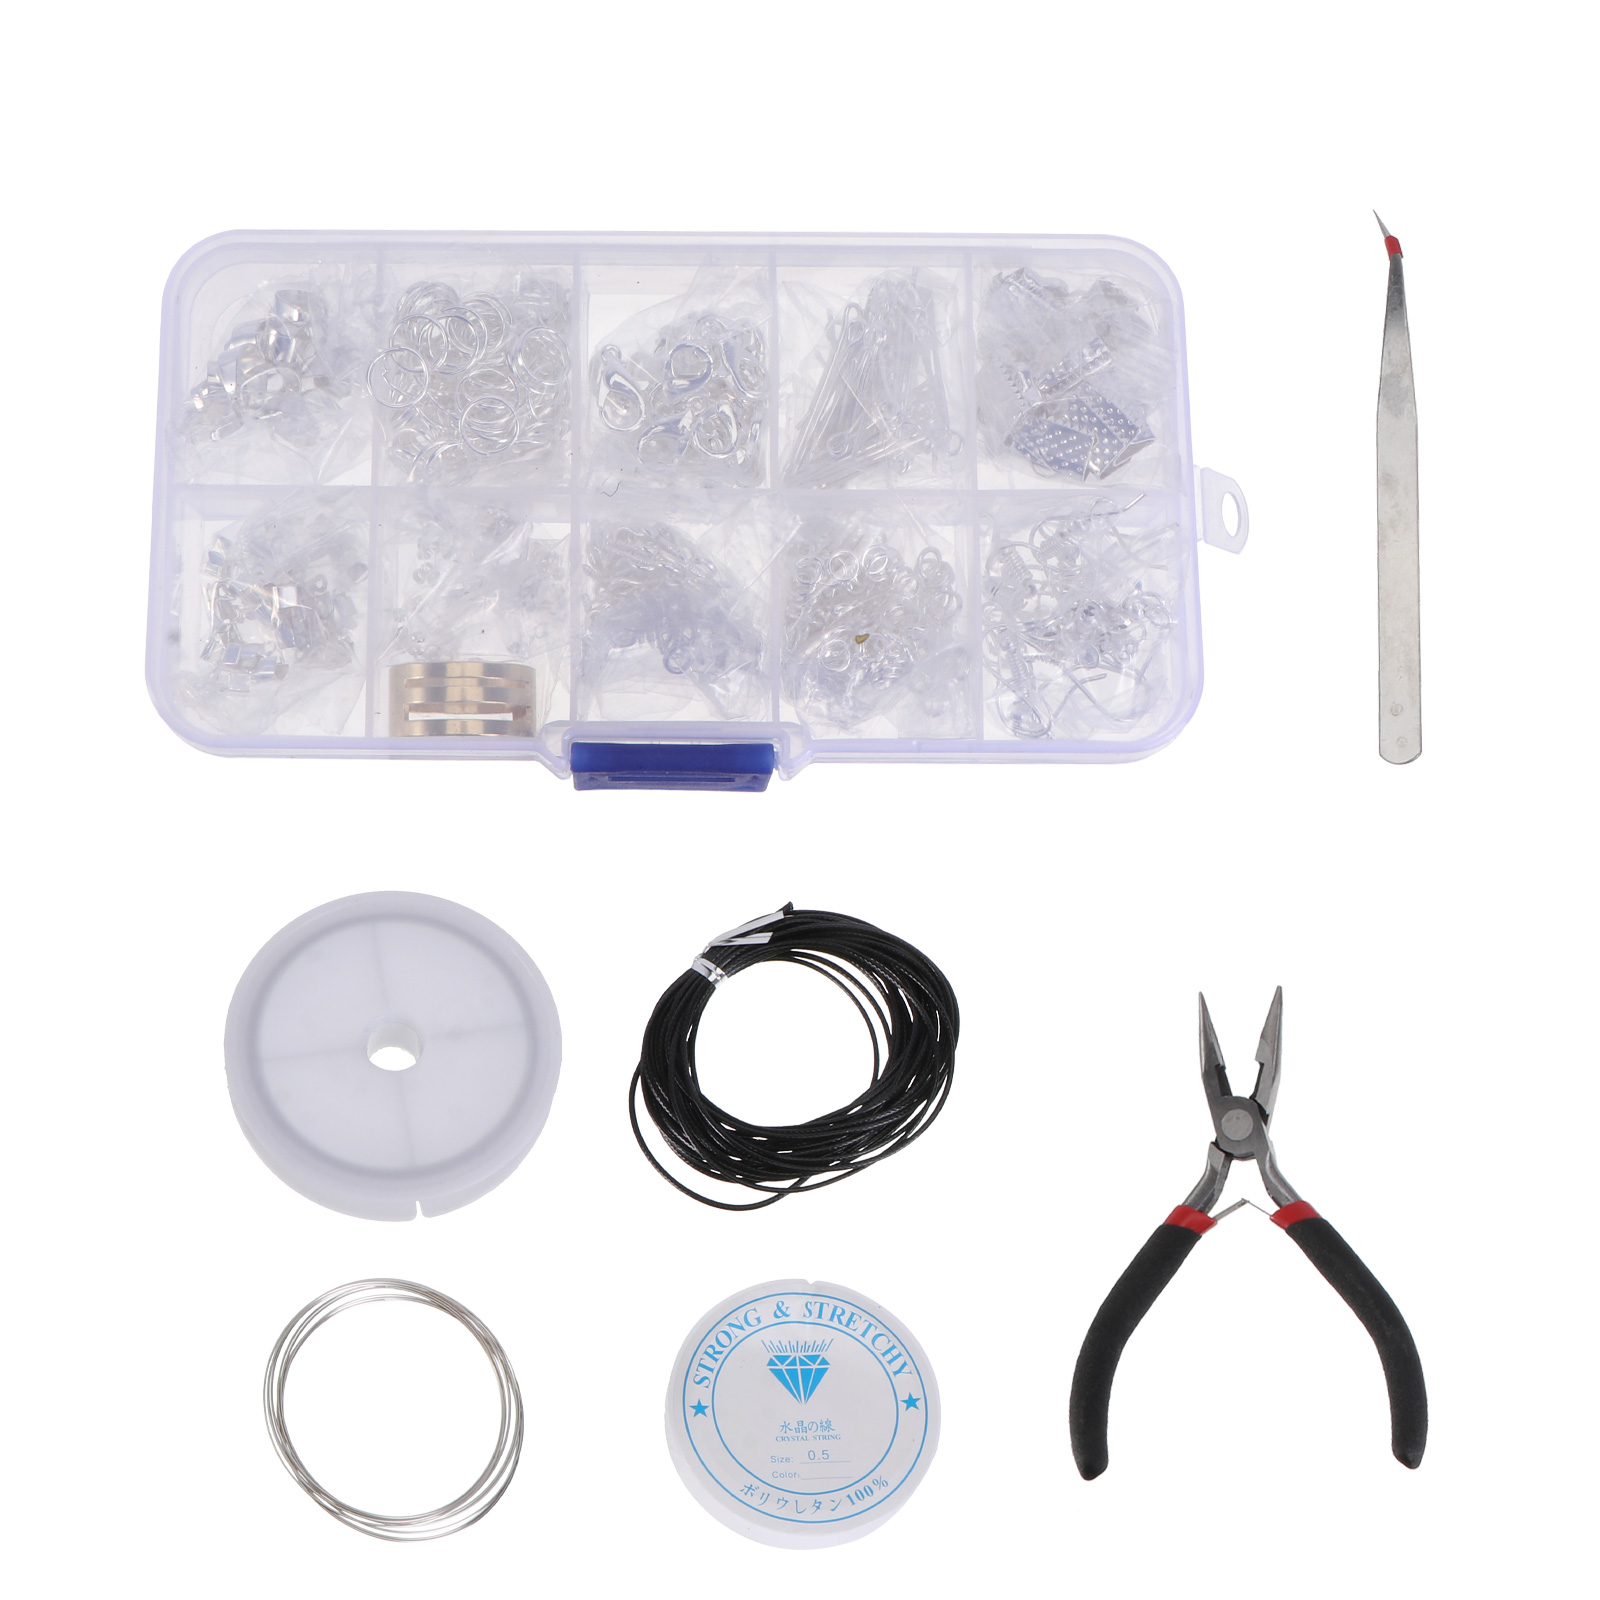 Jewelry Making Kits for Adults DIY Jewelry Making Tool Kit Supplies Kit Jewelry Repair Tools with Accessories, Adult Unisex, Size: 13